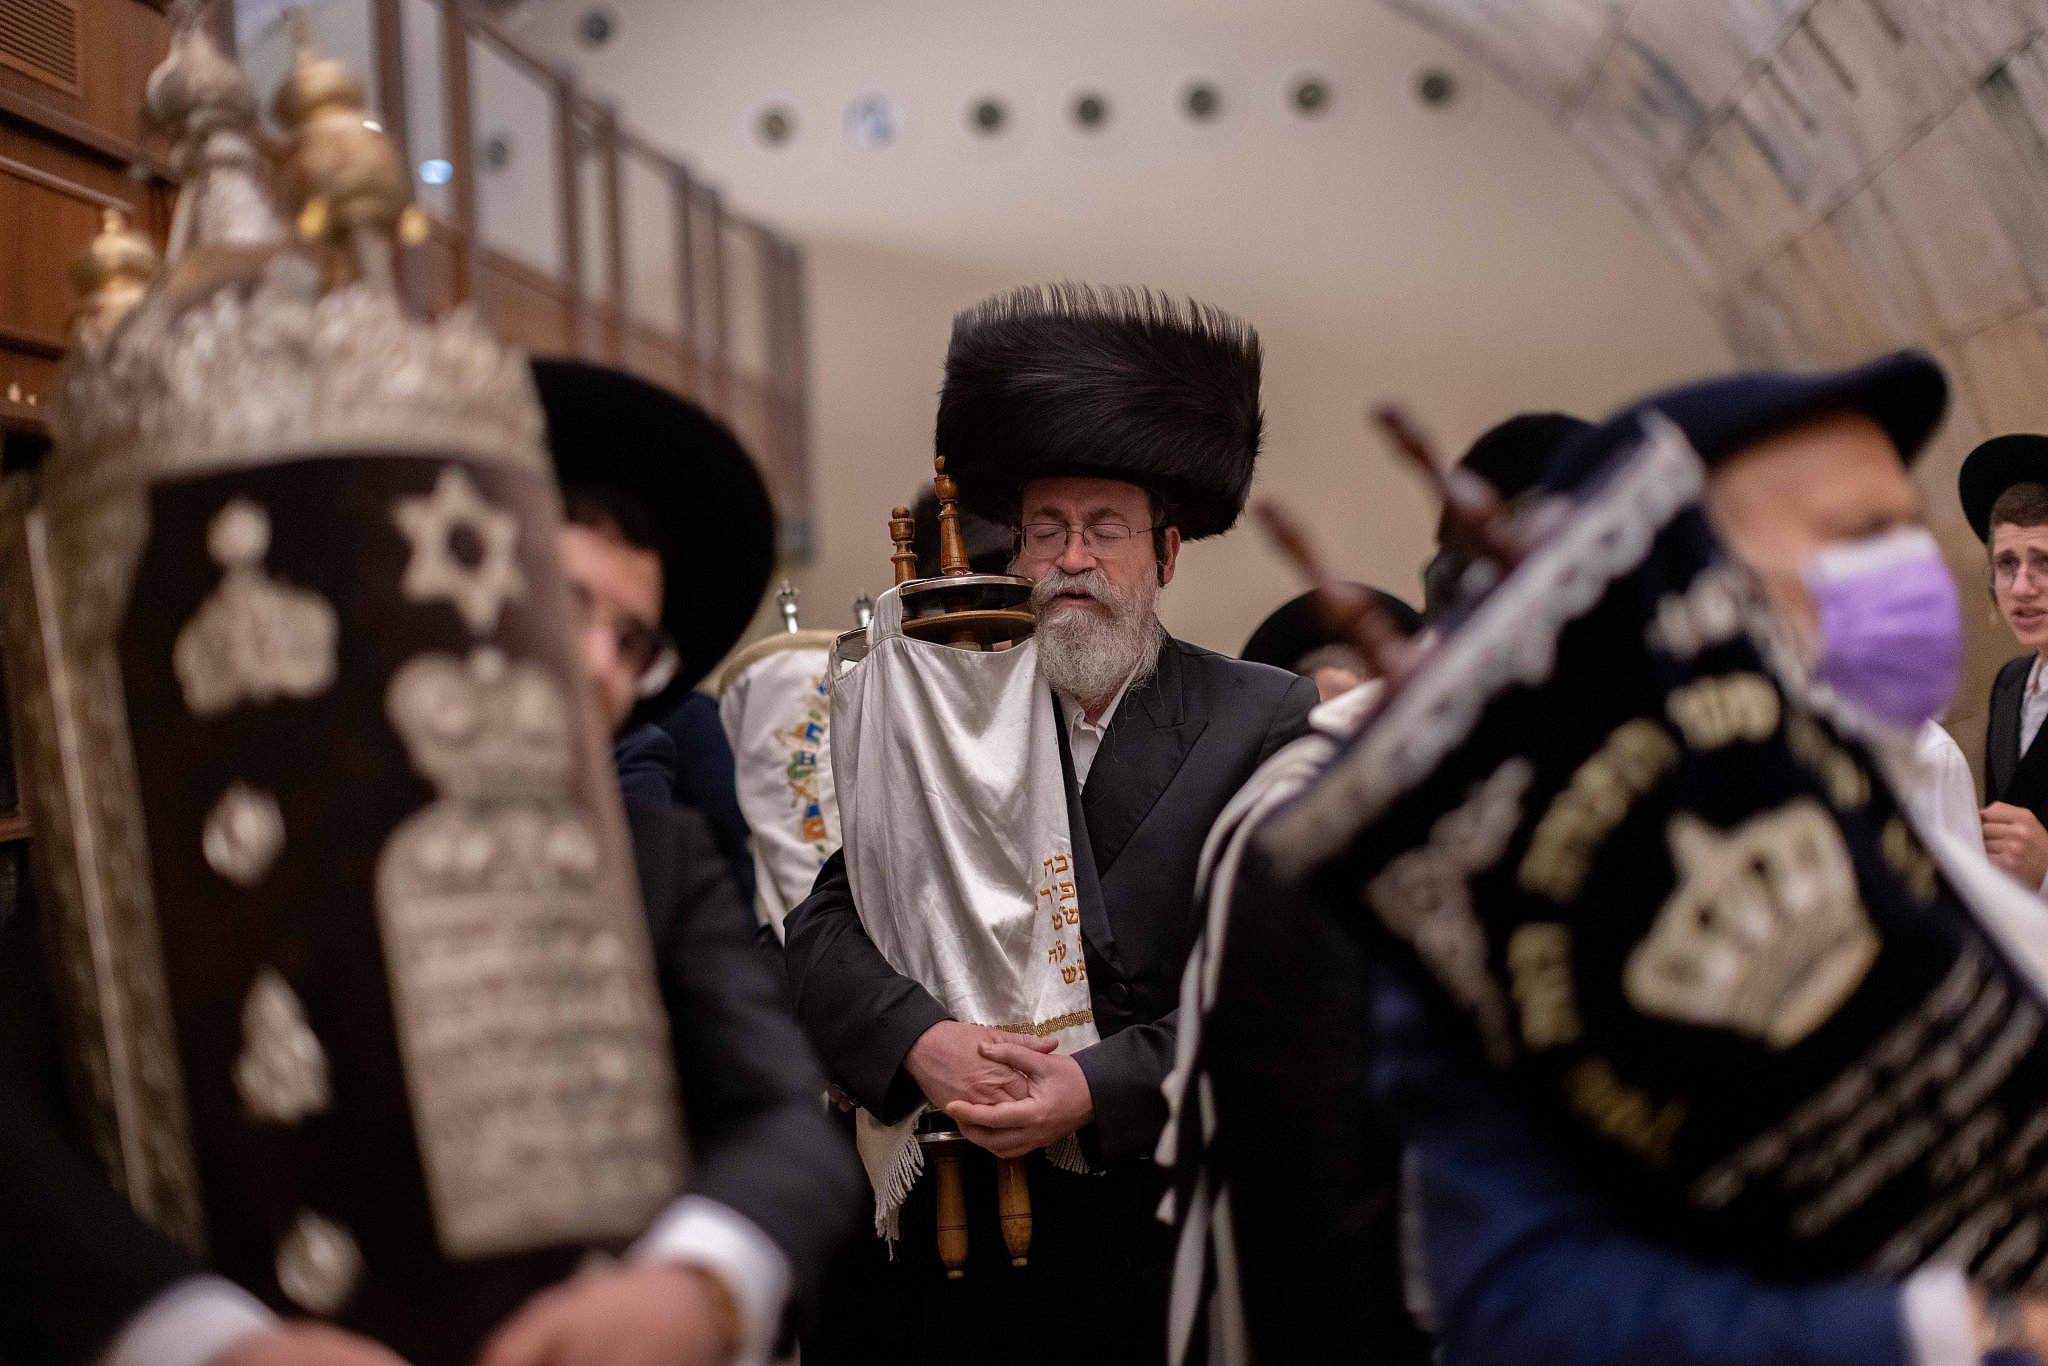 Jewish men carry Torah scrolls as they dance during Simchat Torah celebrations at the Western Wall in Jerusalem Old City, September 28, 2021. (Yonatan Sindel/Flash90)